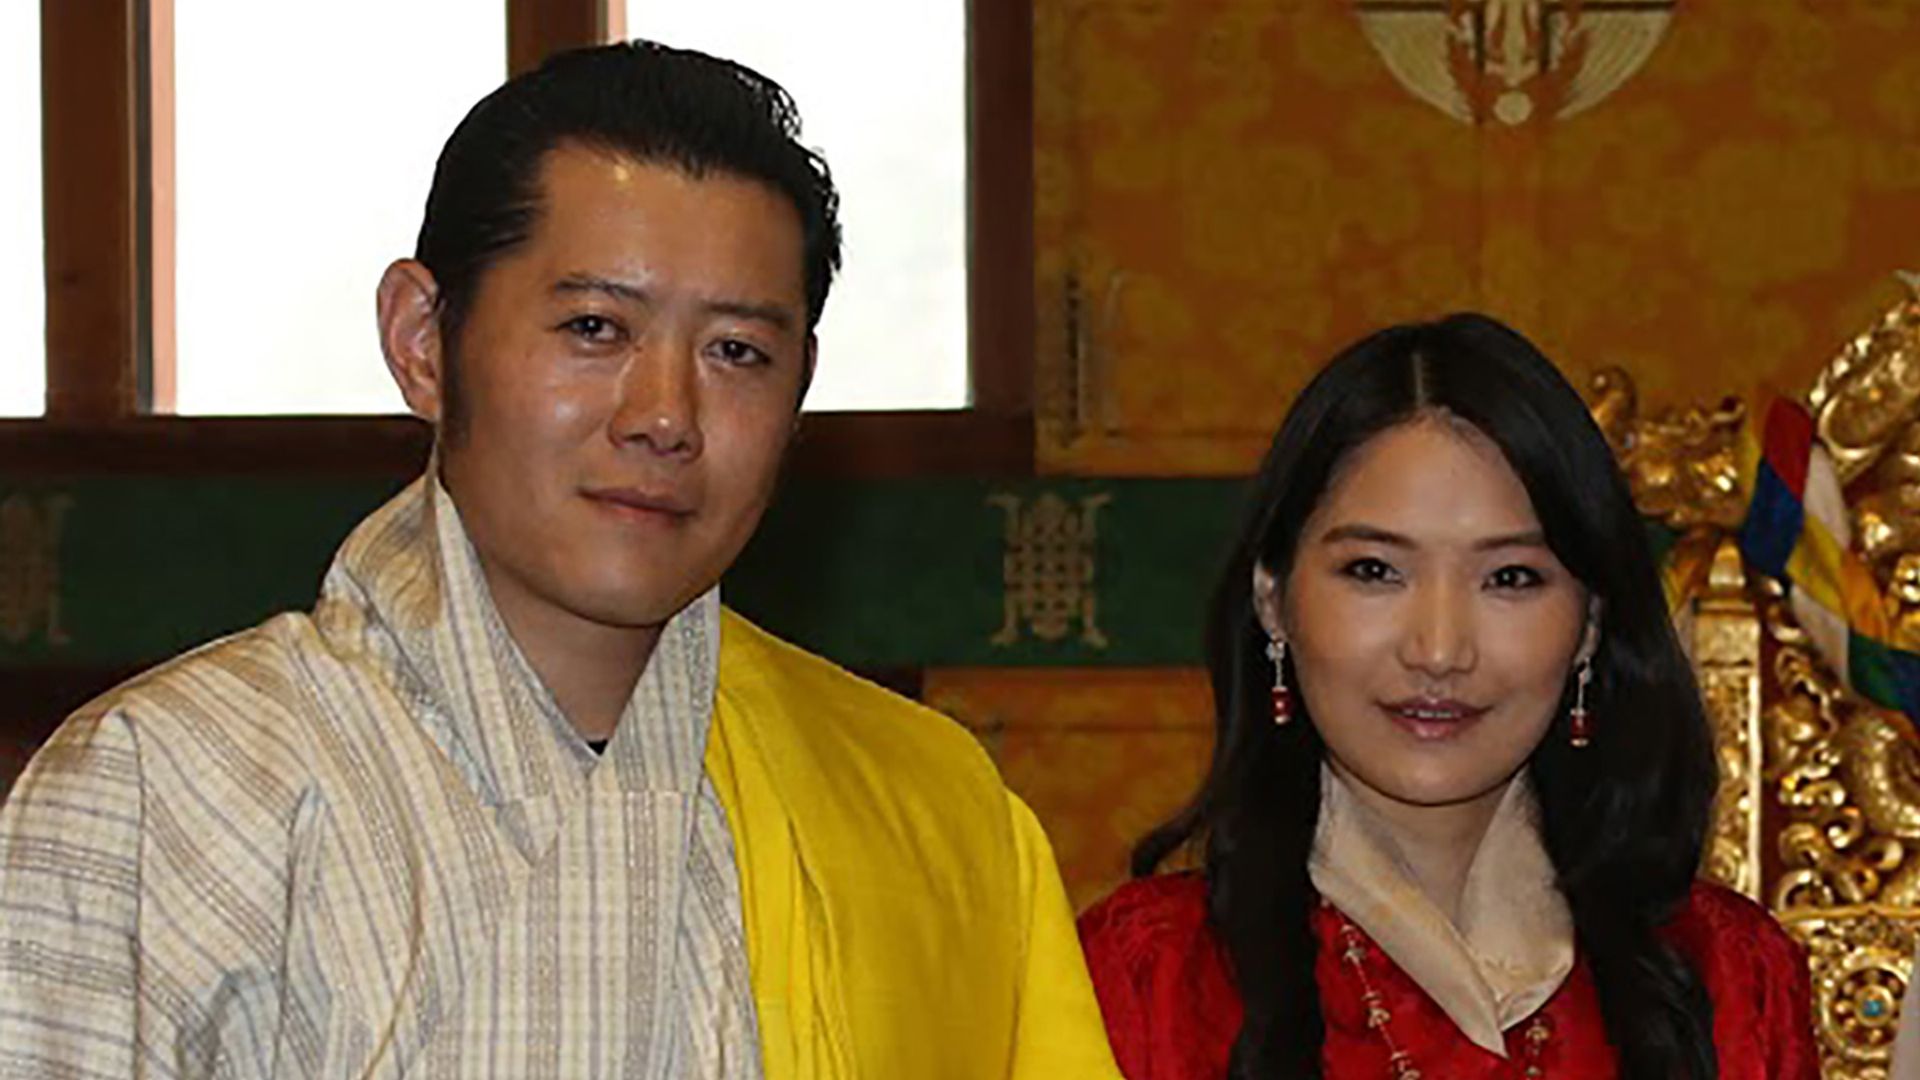 Bhutan's king and queen recreate engagement photos for special reason